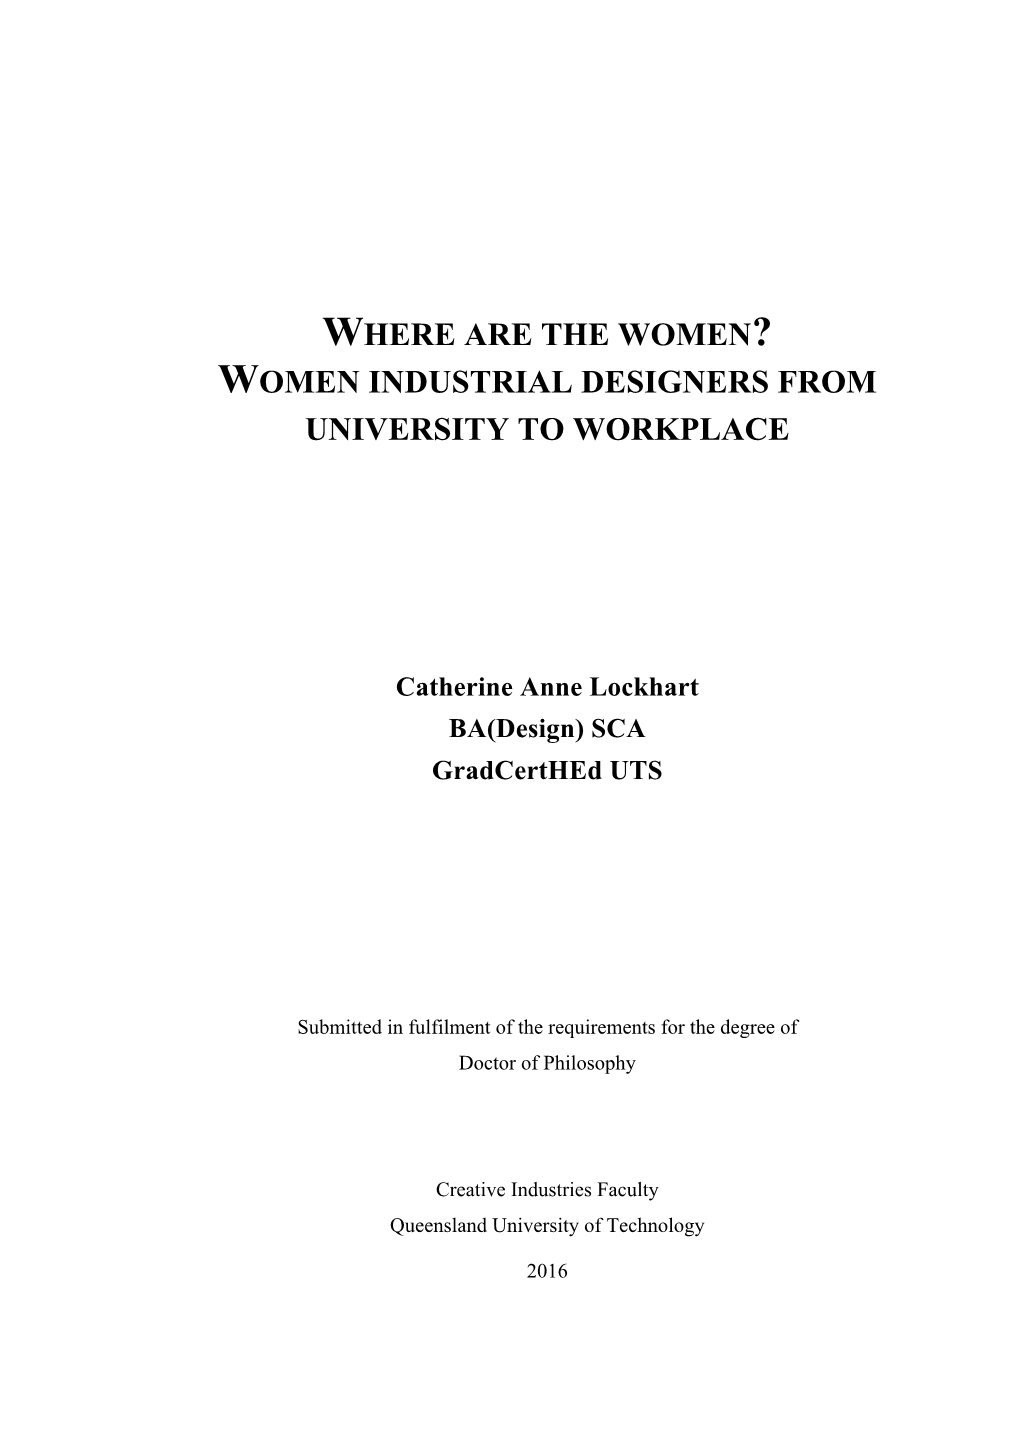 Women Industrial Designers from University to Workplace